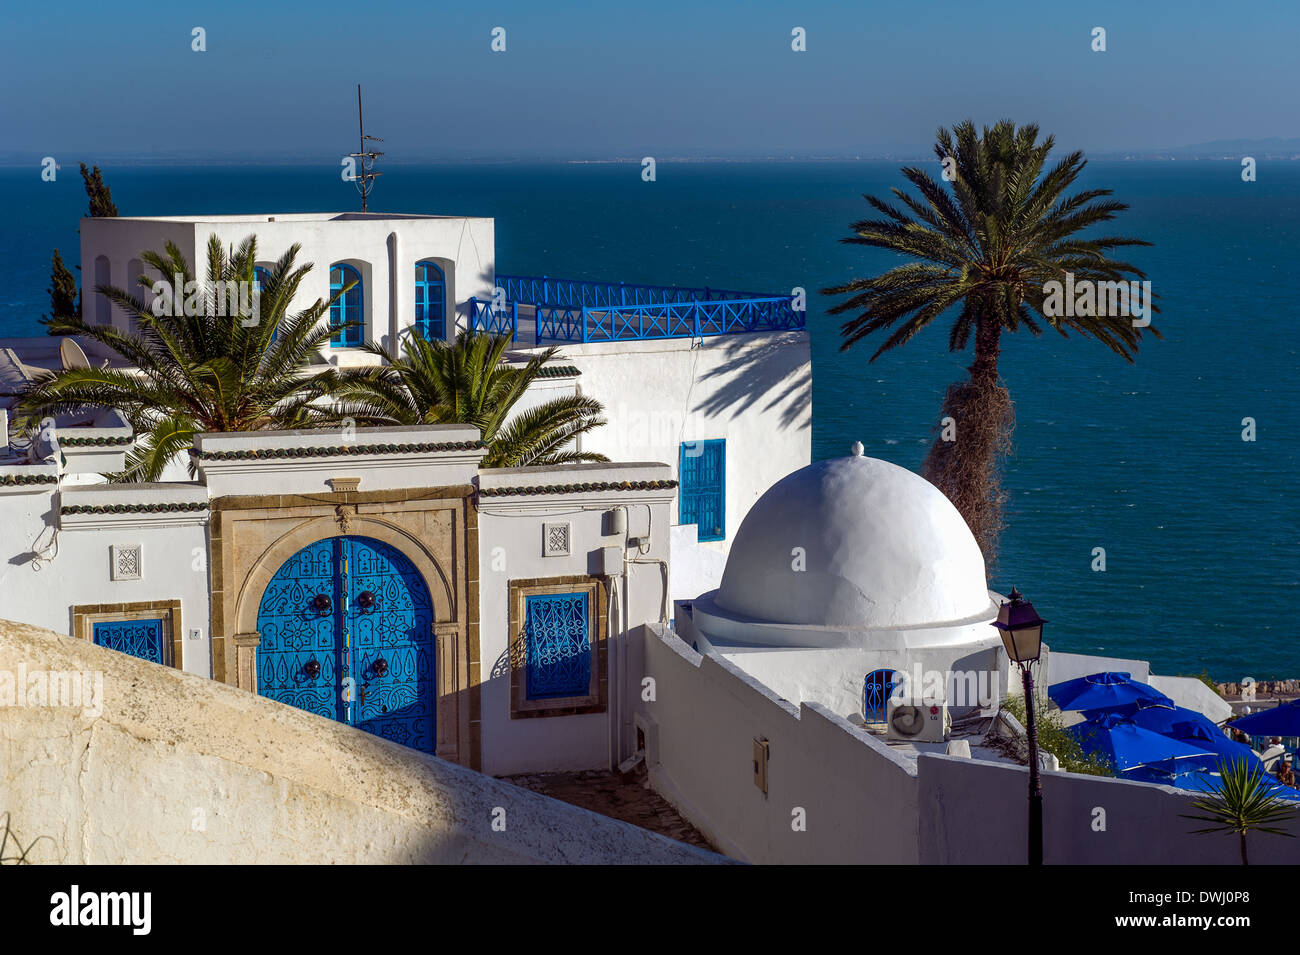 North Africa, Tunisia, Sidi Bou Said. Views of the Gulf of Tunis and the traditional white houses of the Medina. Stock Photo